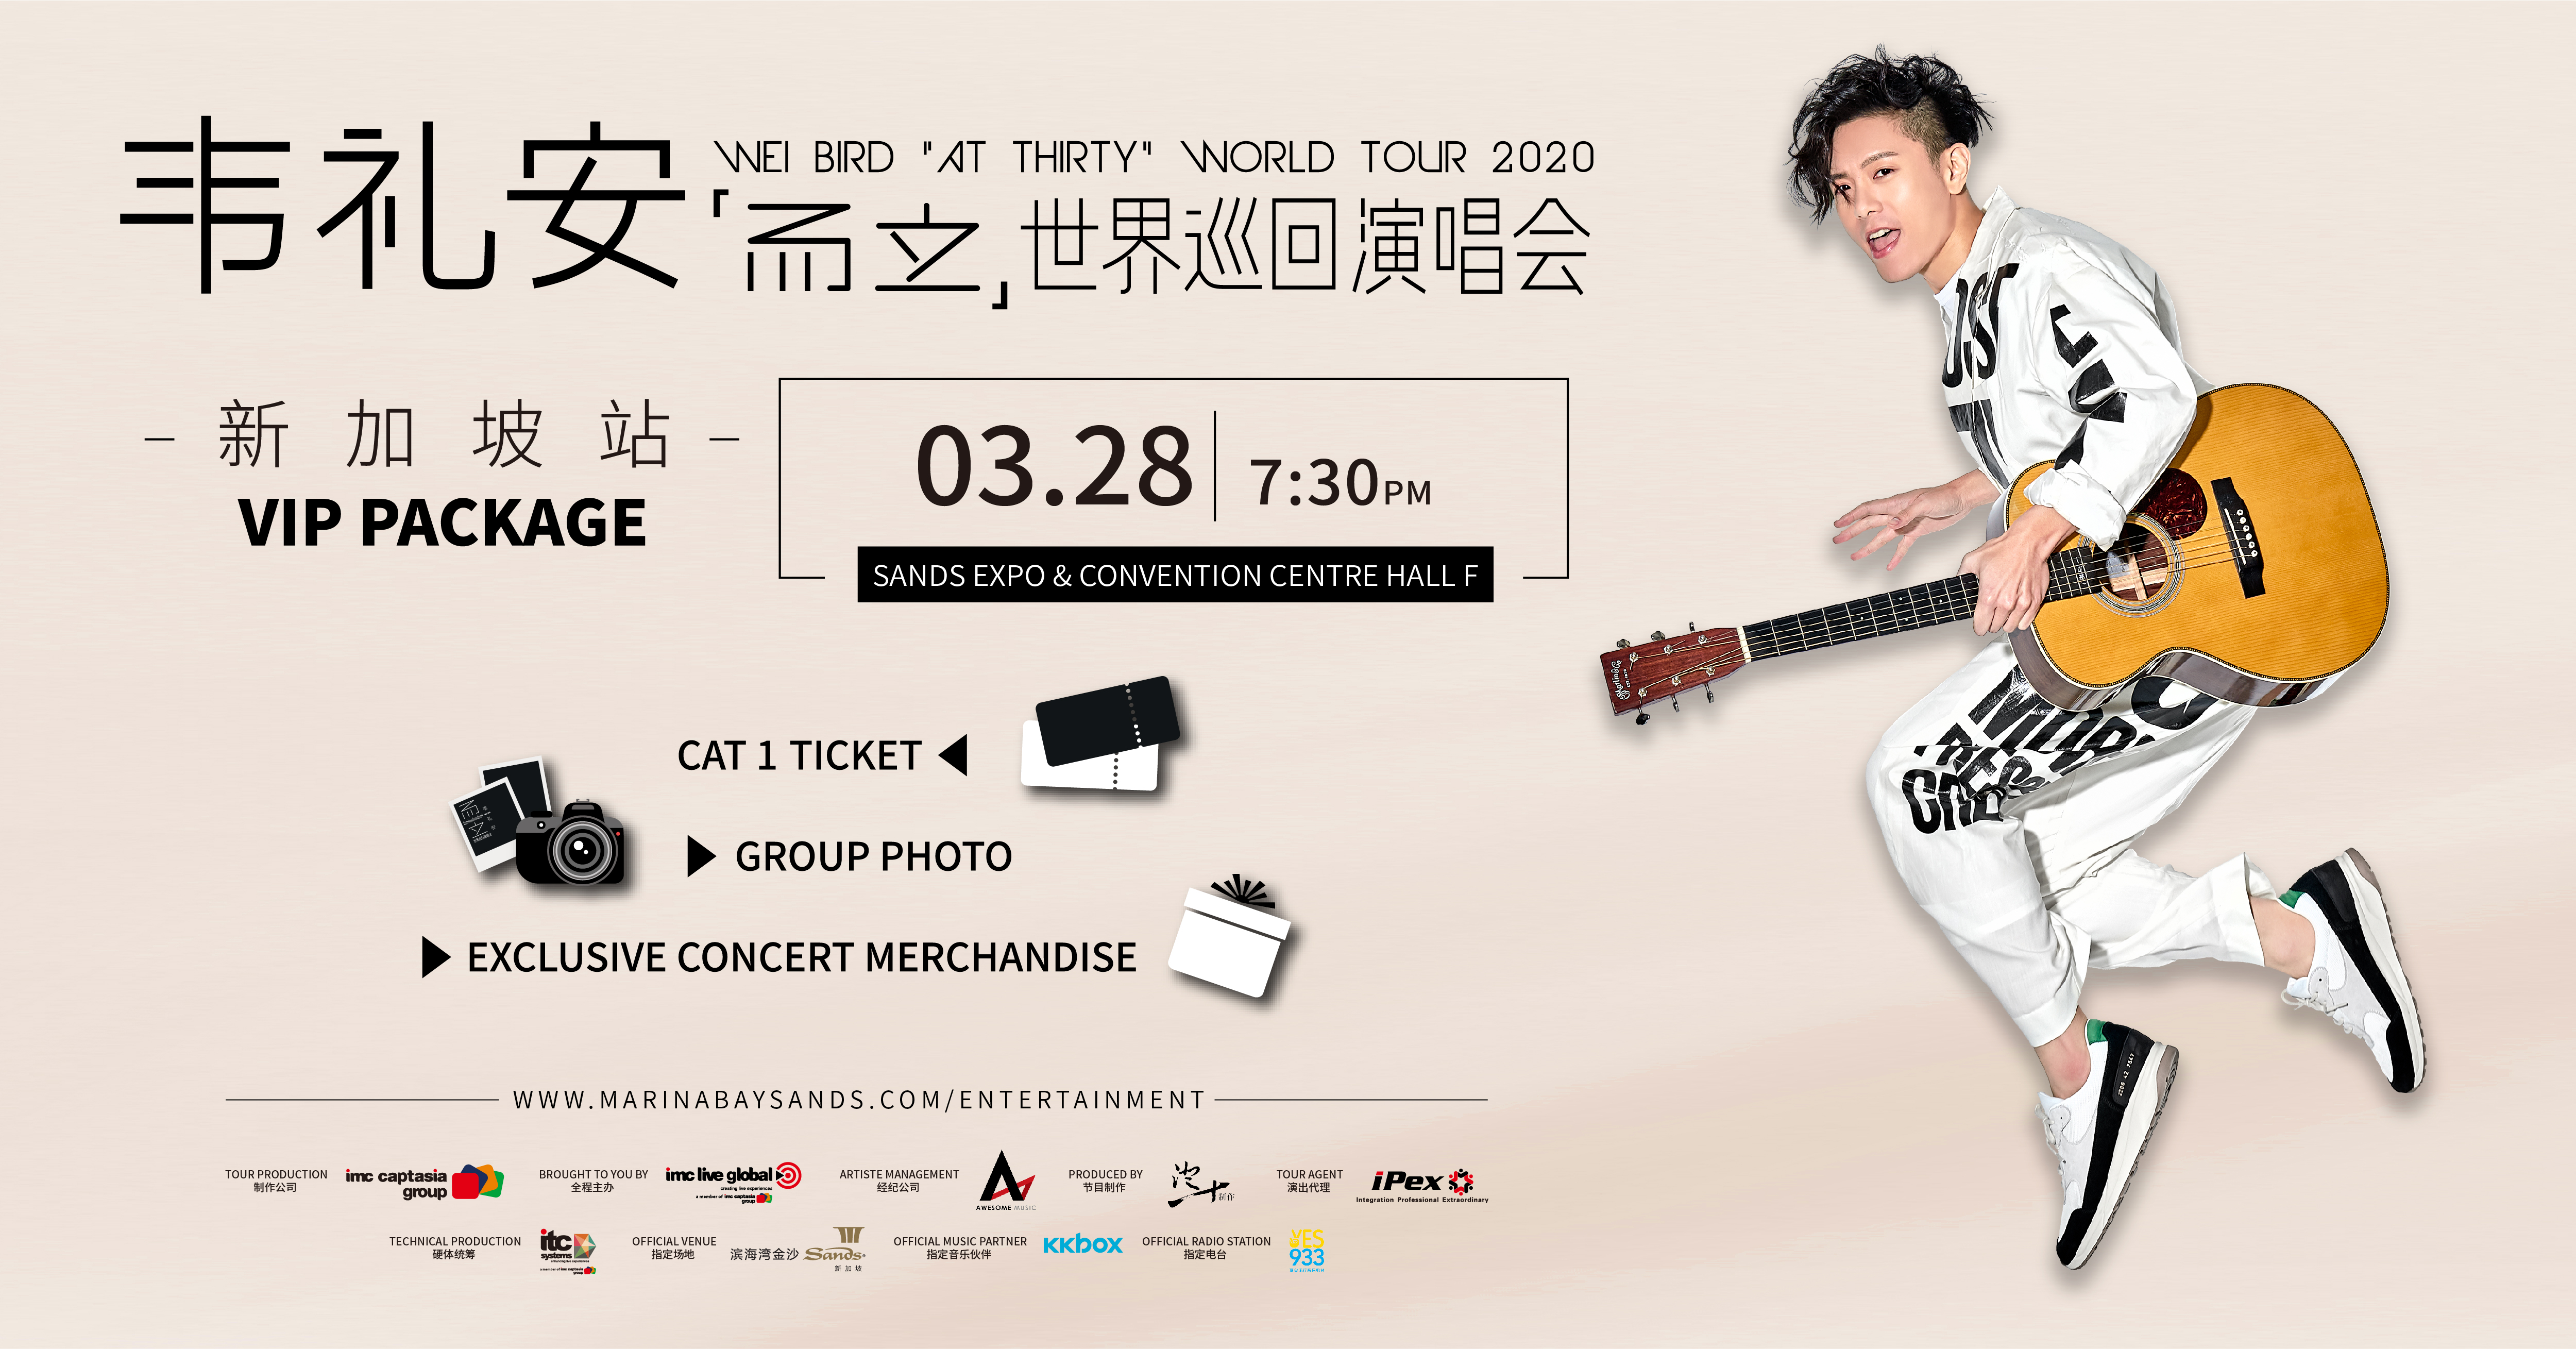 WEI BIRD BRINGS “AT THIRTY” WORLD TOUR TO SINGAPORE THIS MARCH 